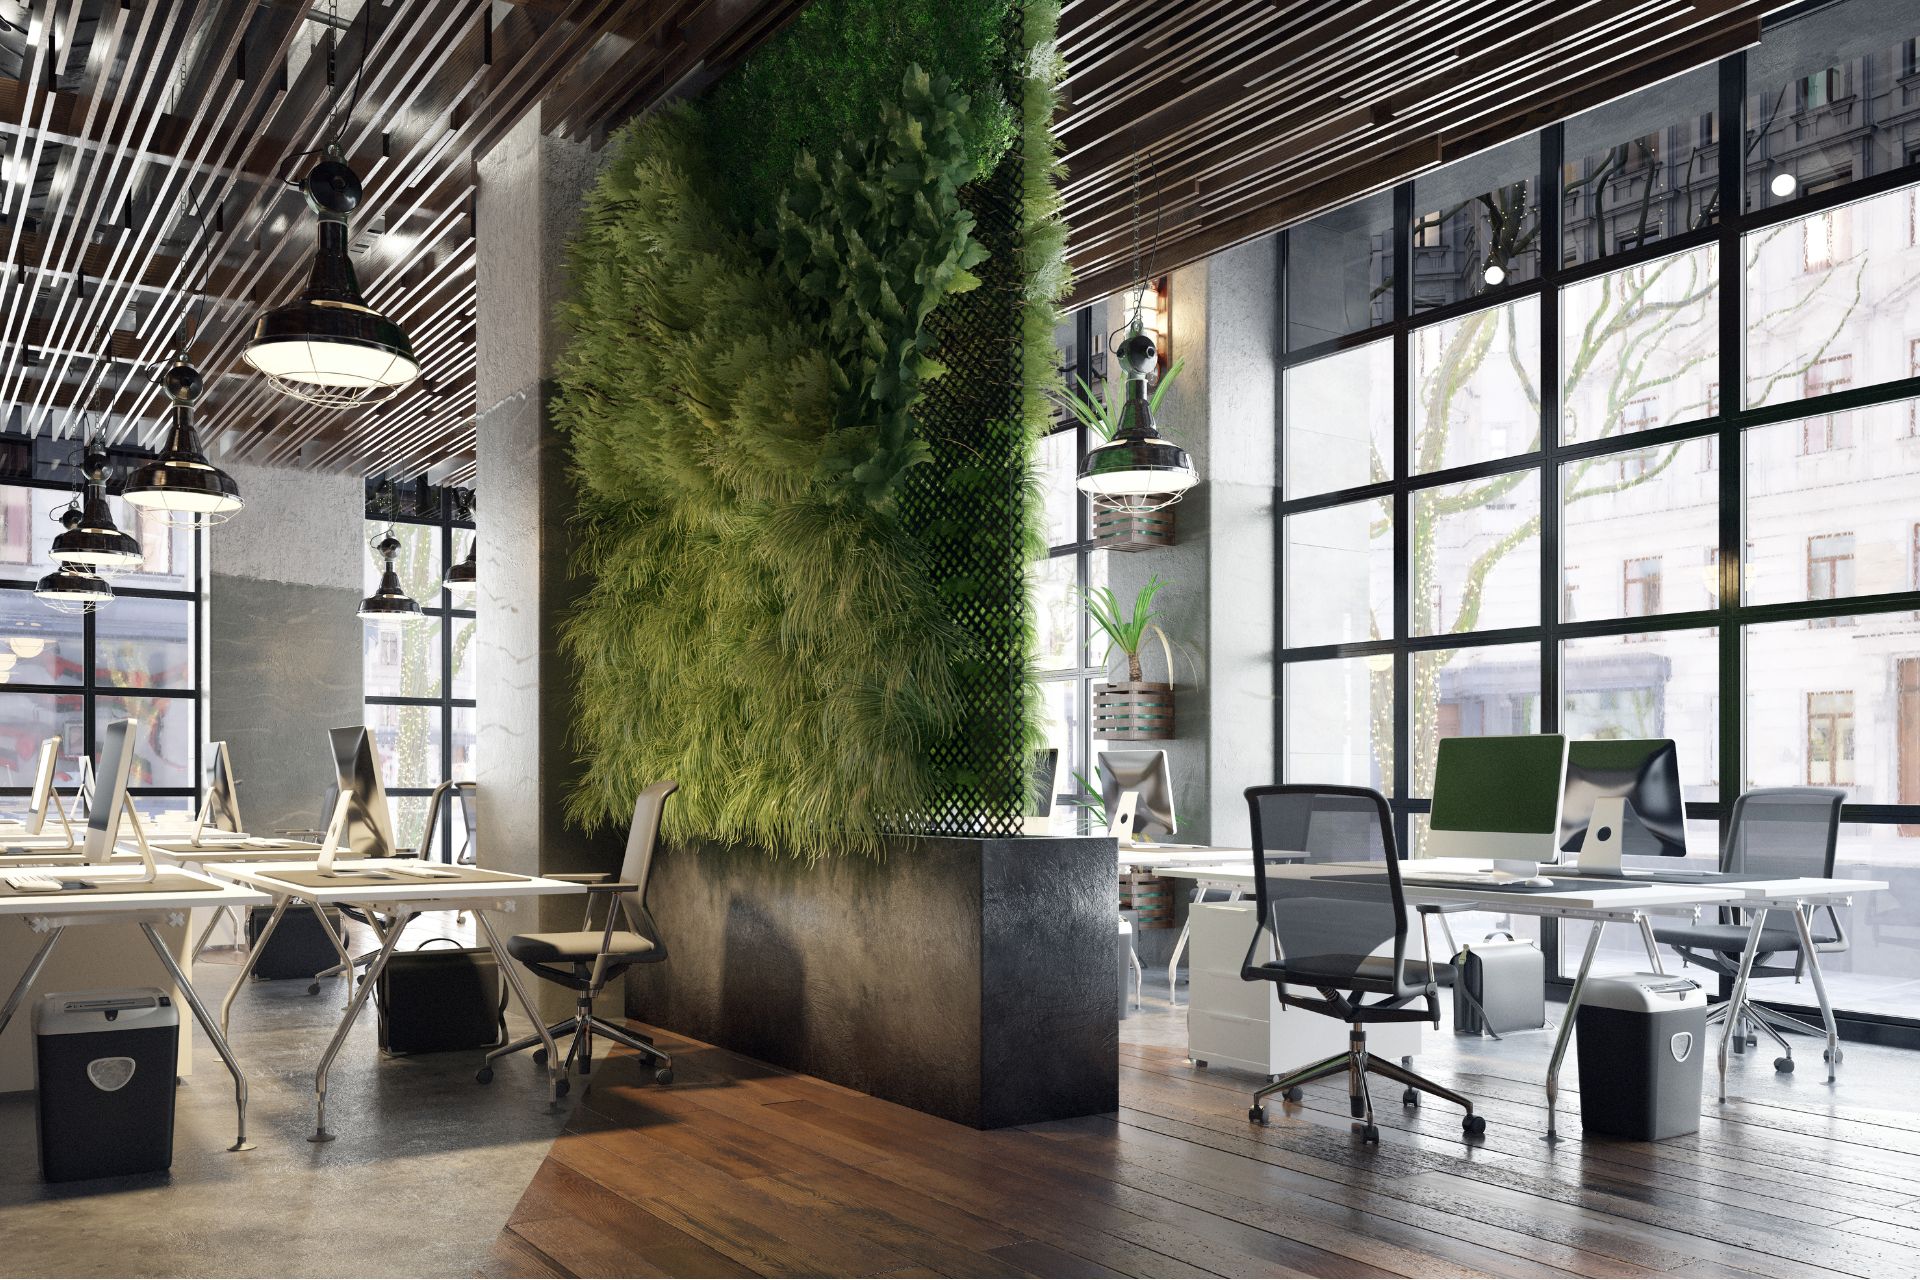 A good working environment increases productivity and employee satisfaction. Find out how office design contributes to this in our blog.